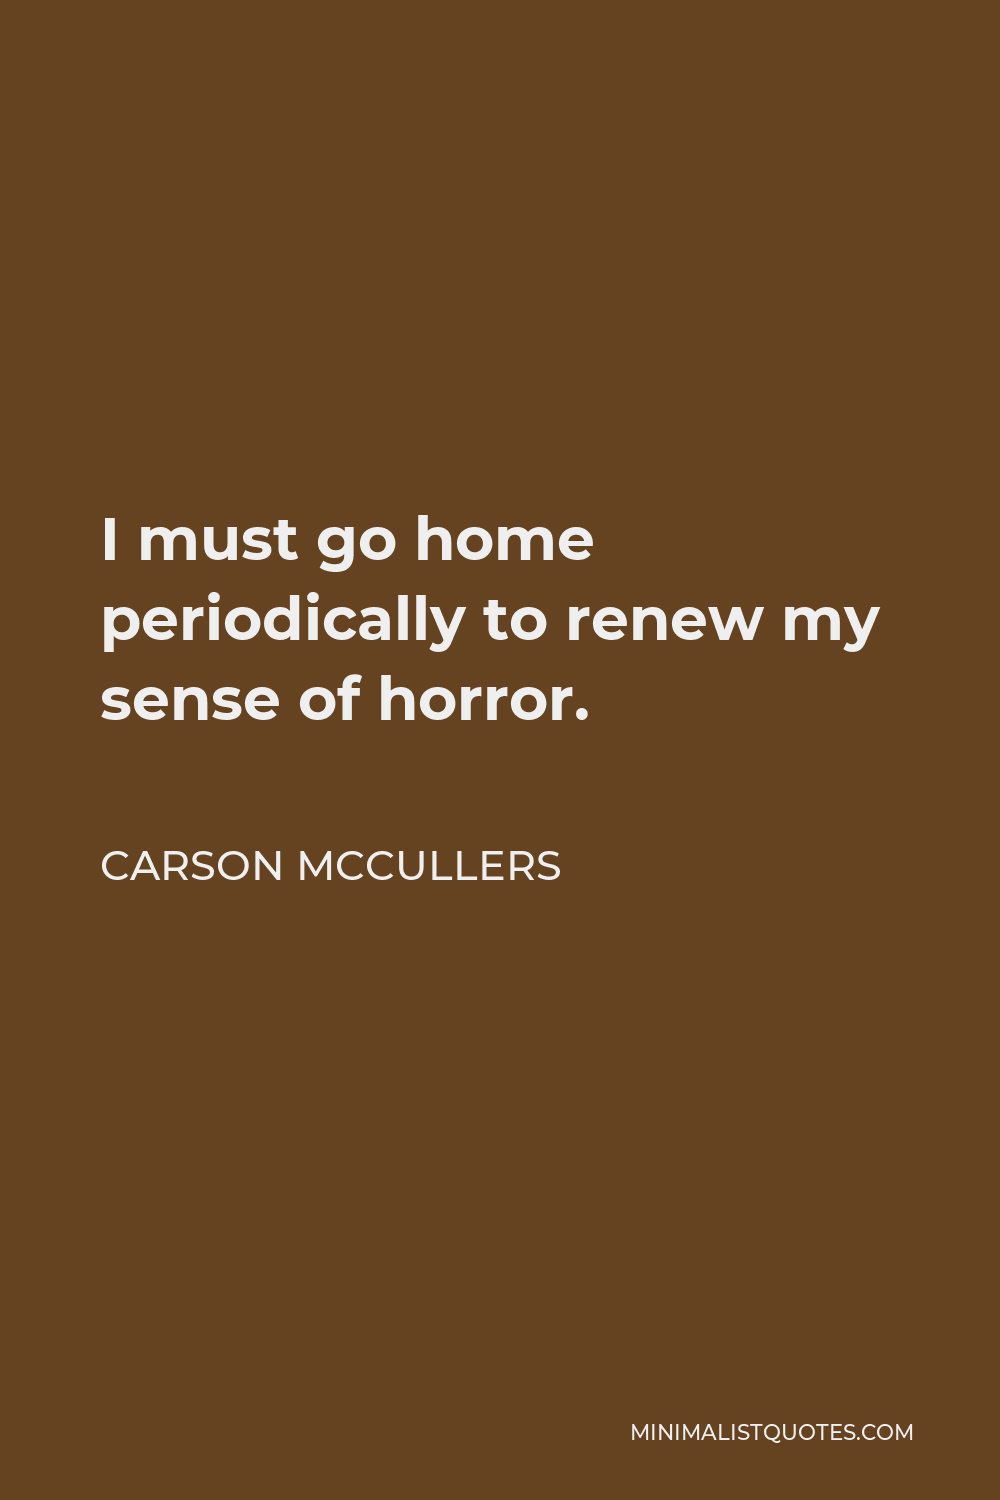 Carson McCullers Quote - I must go home periodically to renew my sense of horror.